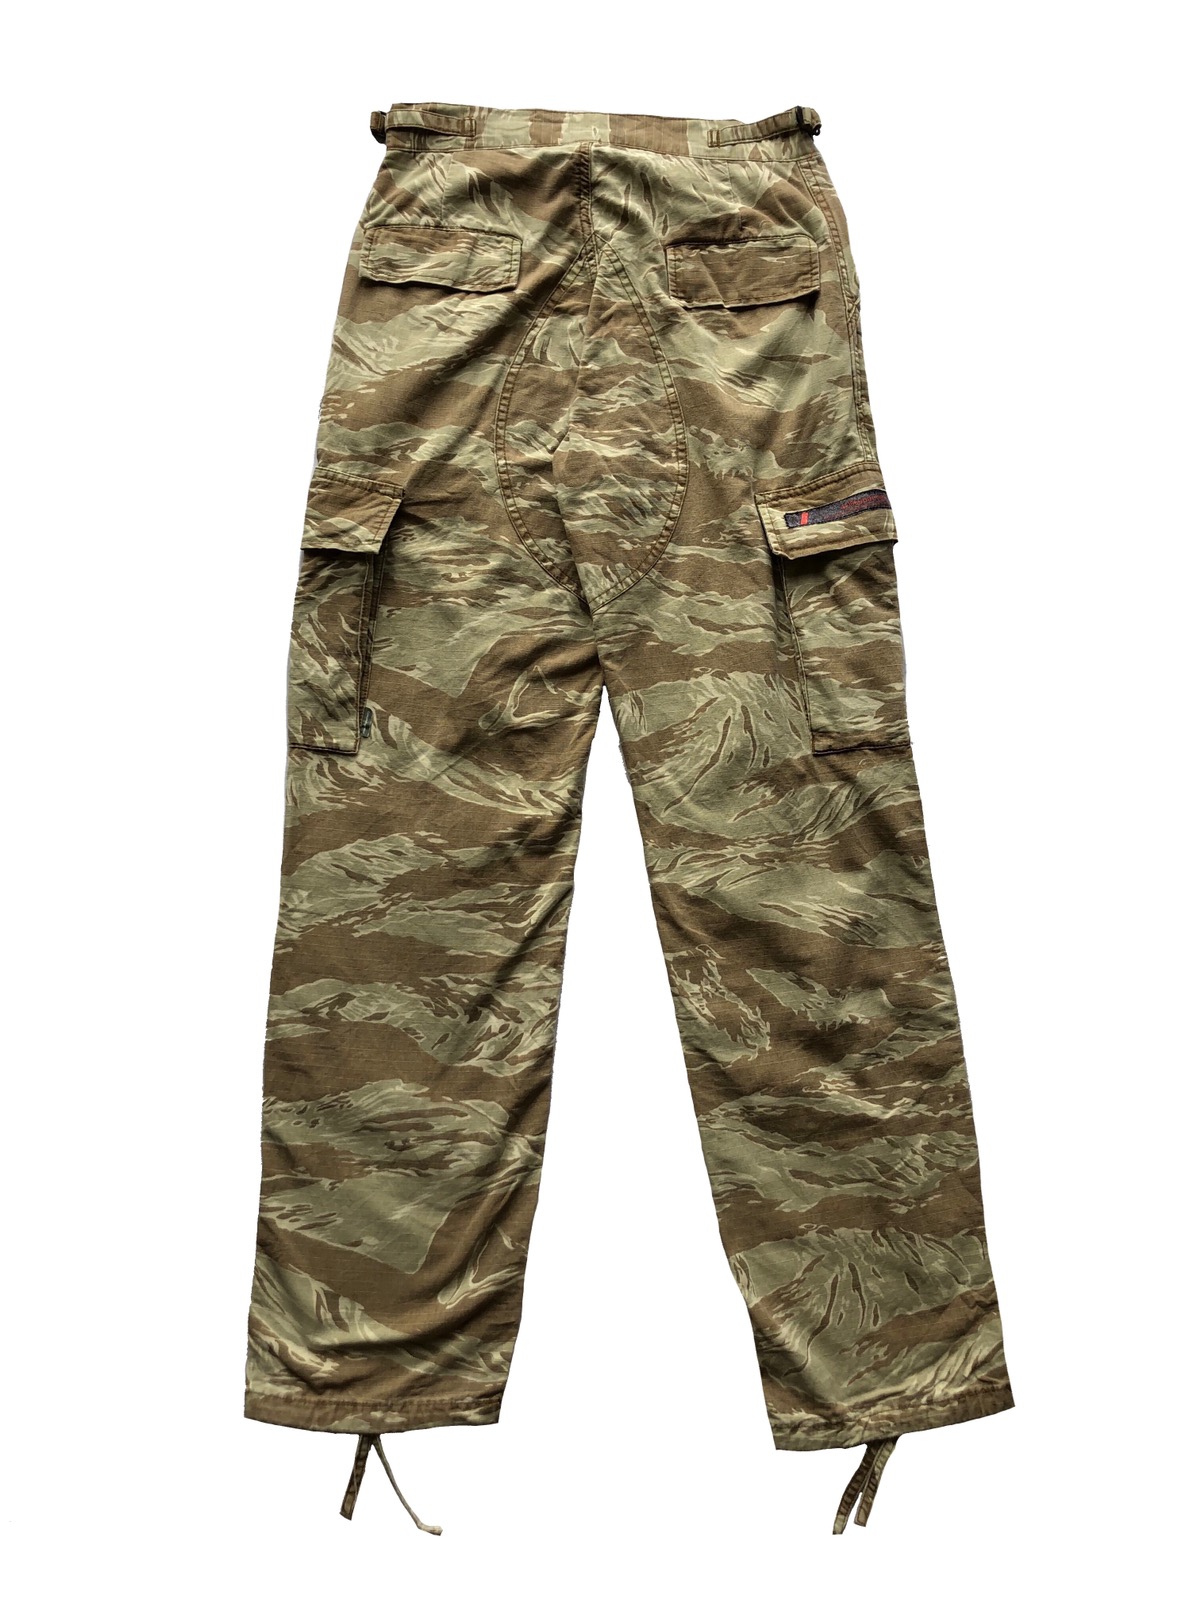 WTAPS Vintage 40% Uparmed Camouflage Cargo Trousers